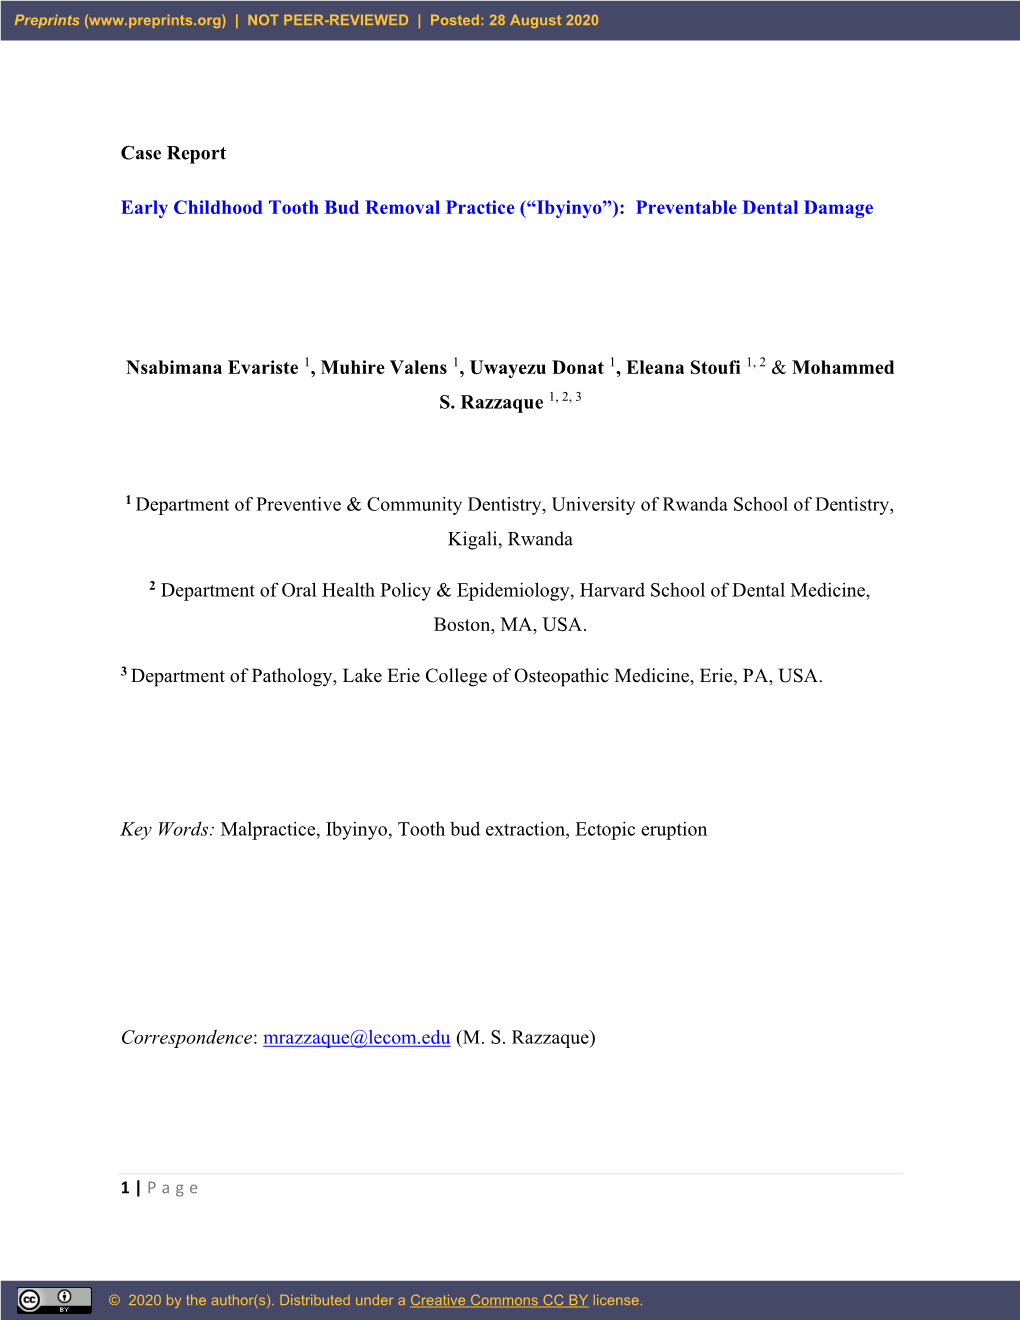 Case Report Early Childhood Tooth Bud Removal Practice